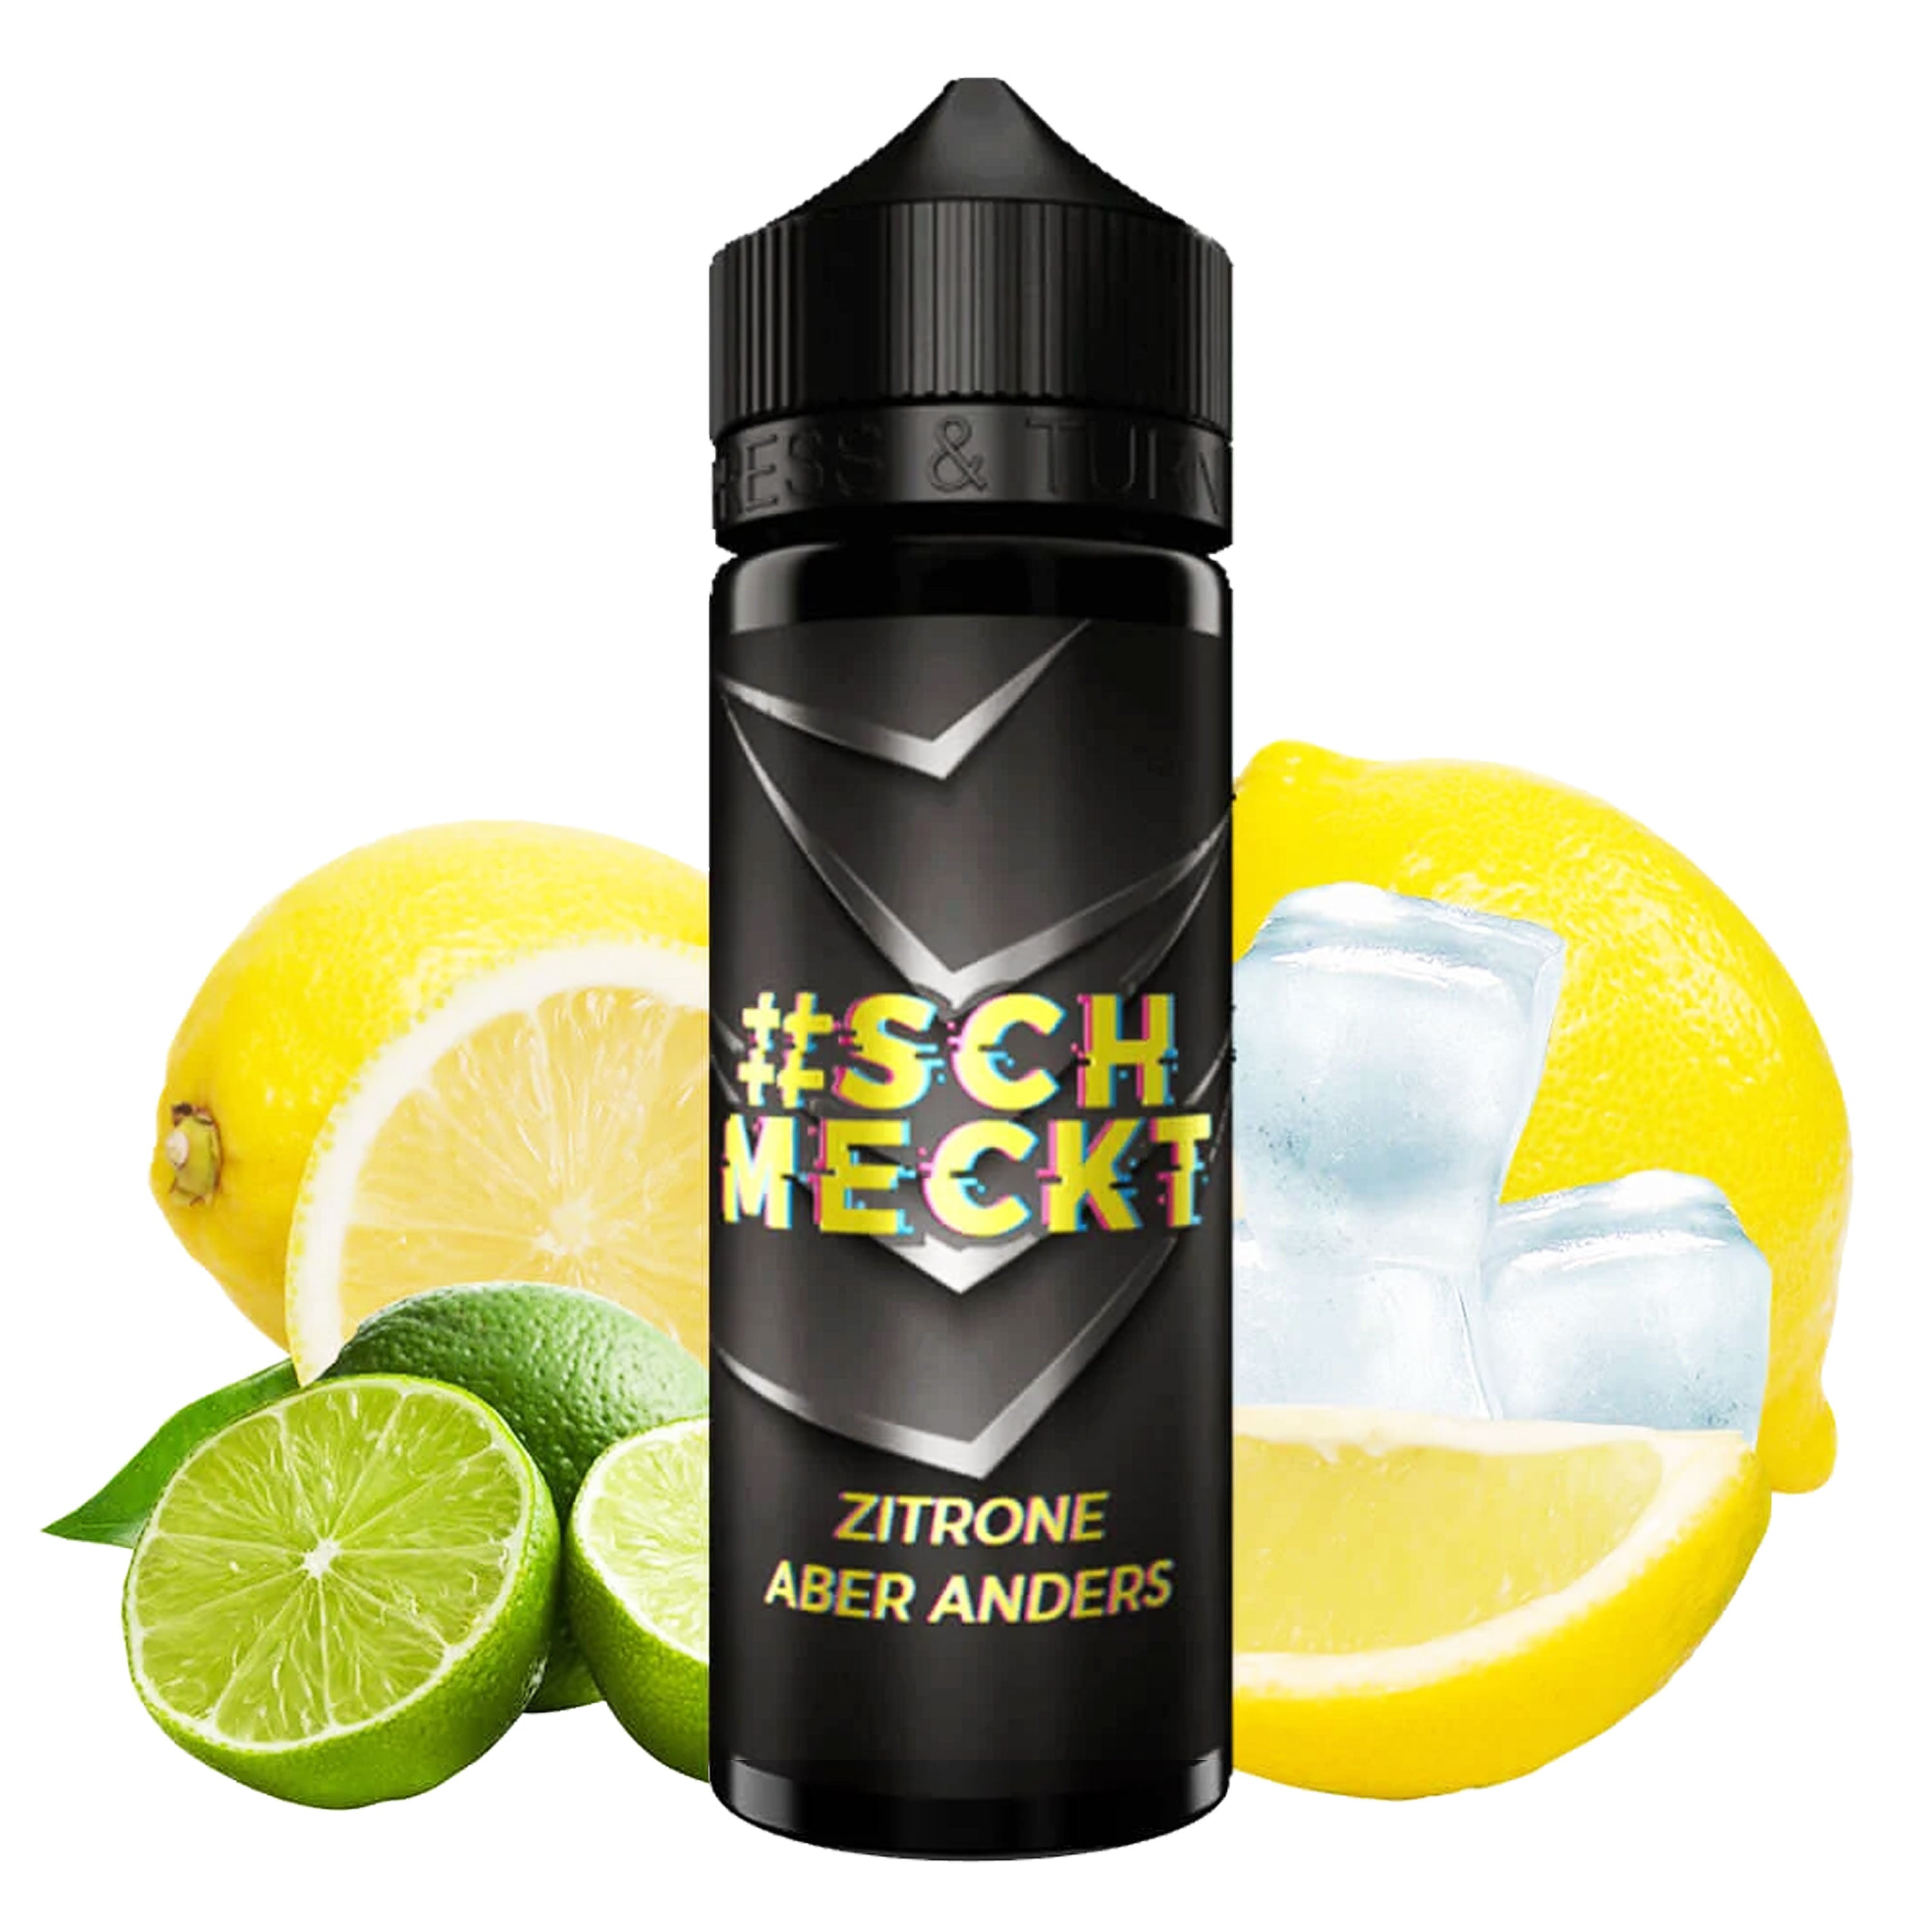 #Schmeckt - Zitrone aber anders - Longfill Aroma 10 ml